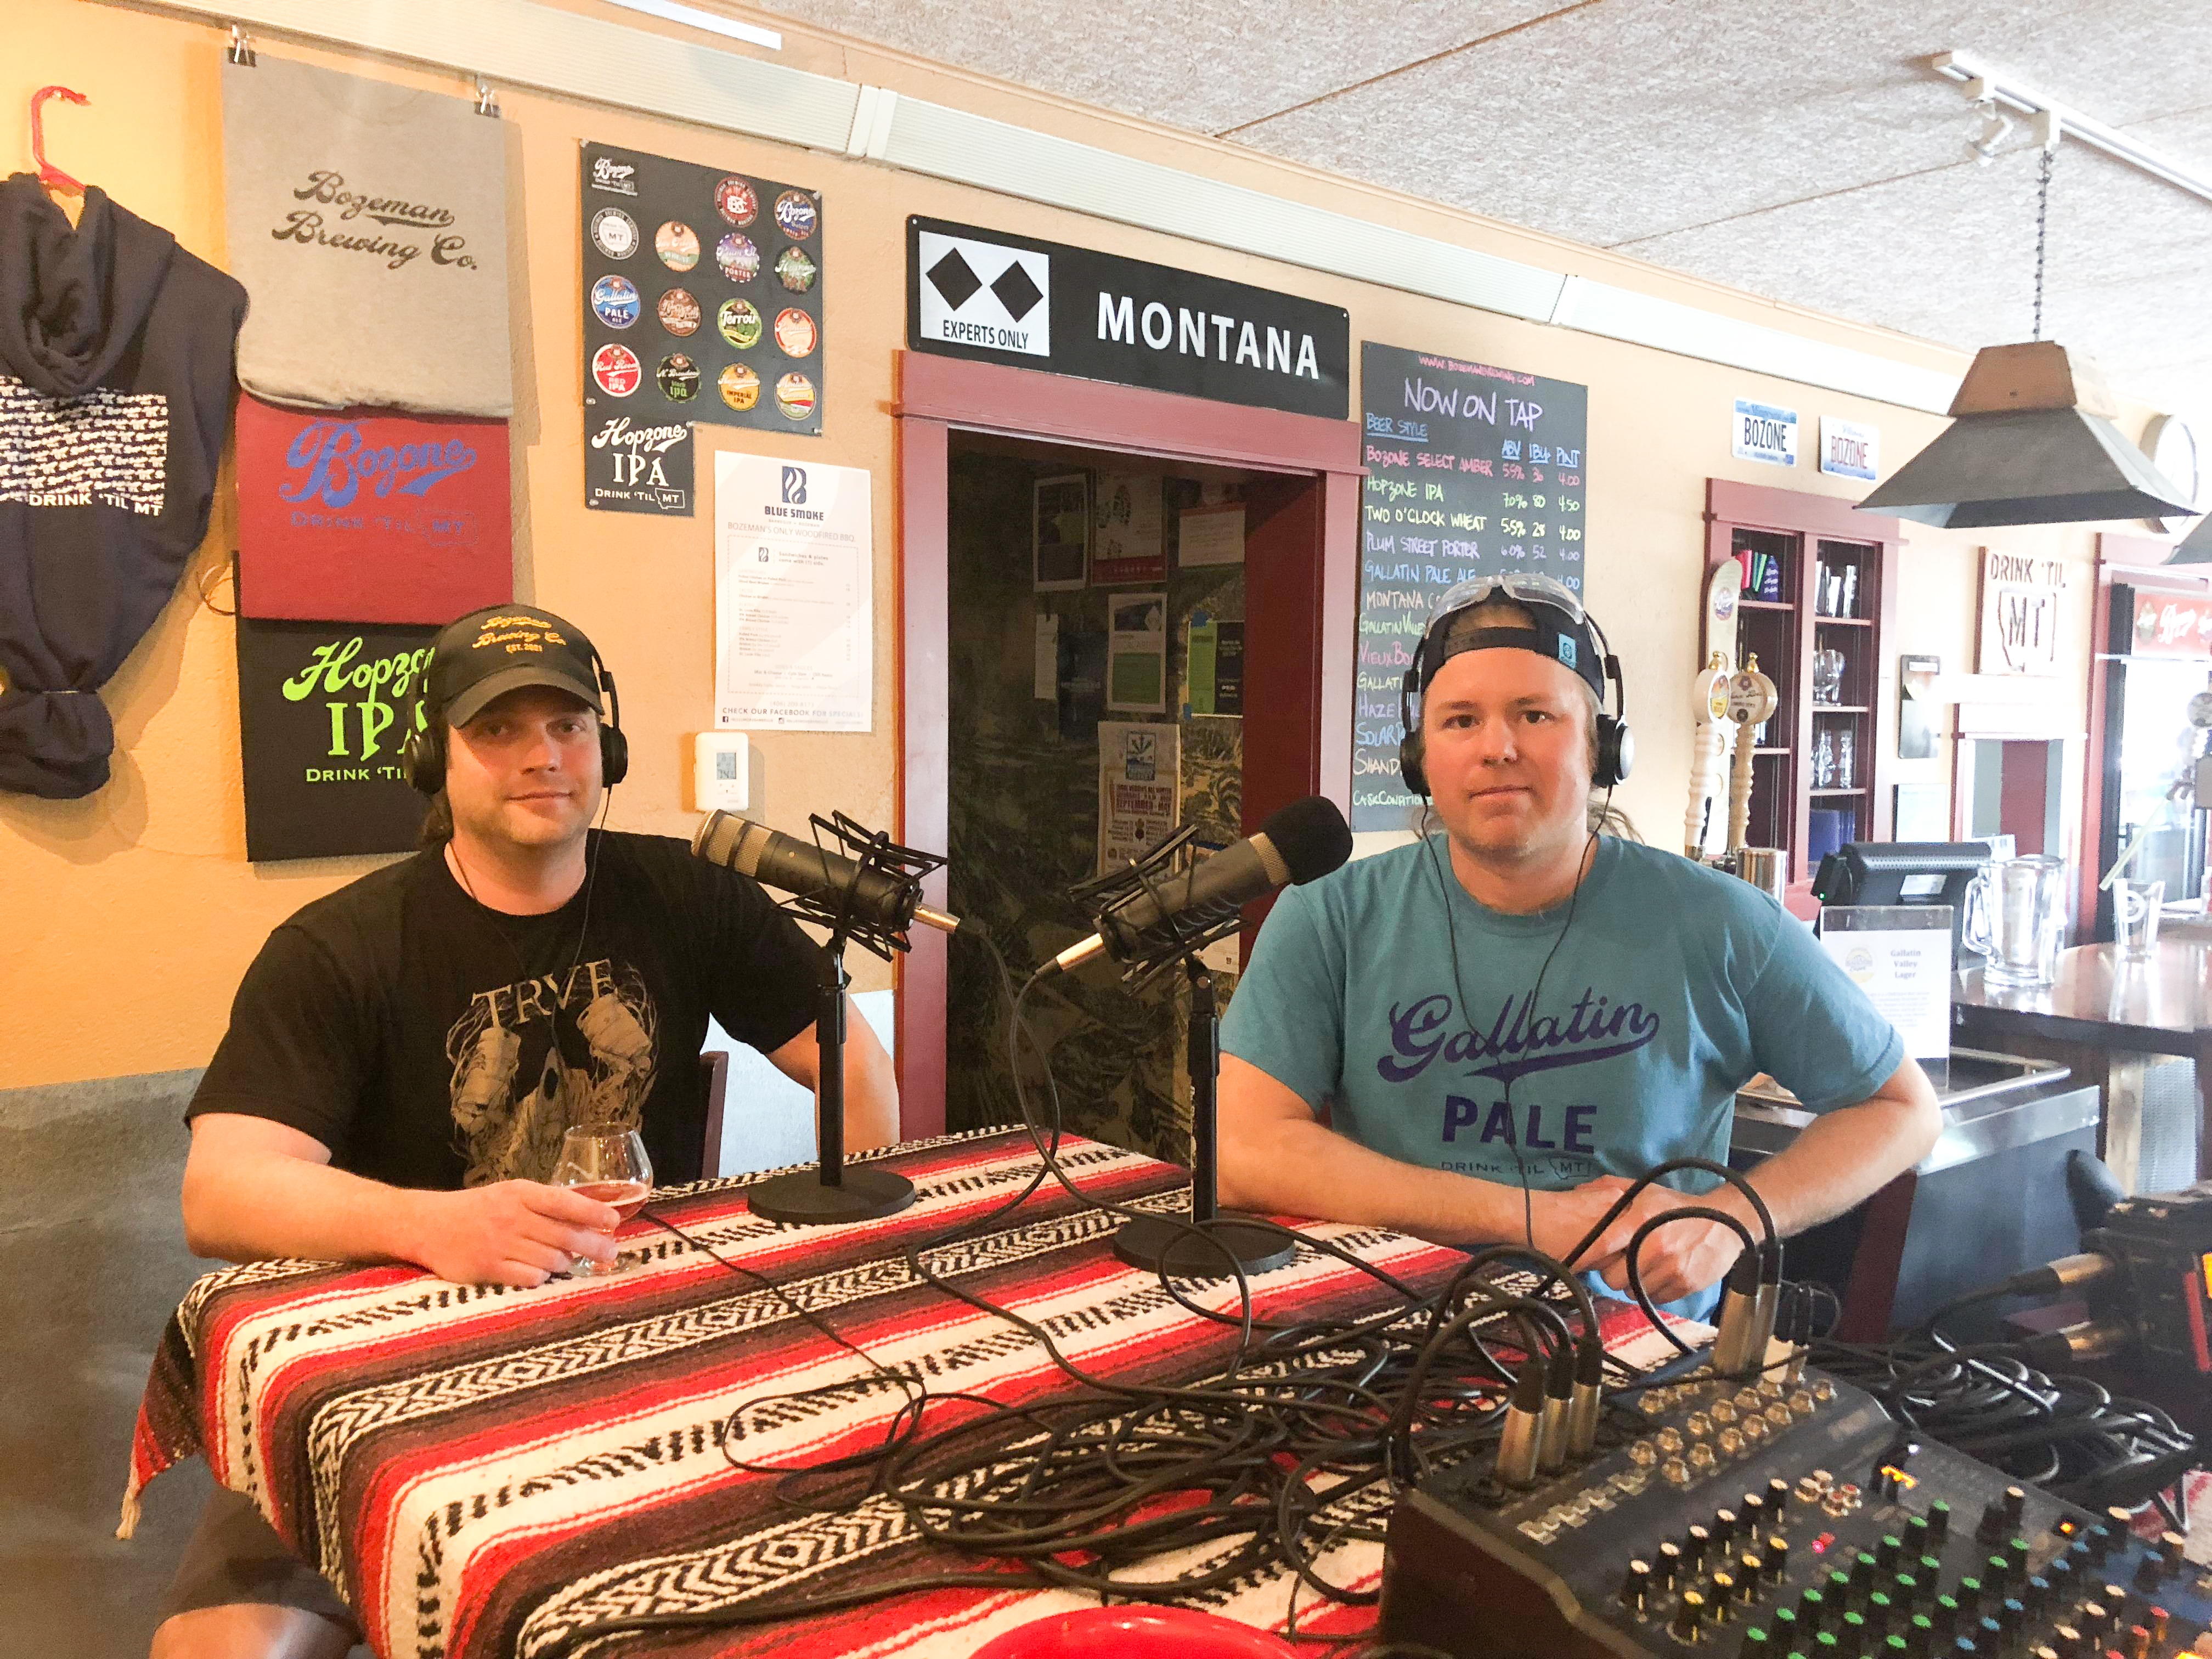 Bill Hyland and Ryan Beal and Bozeman Brewing Company - Portland Beer Podcast episode 85 by Steven Shomler